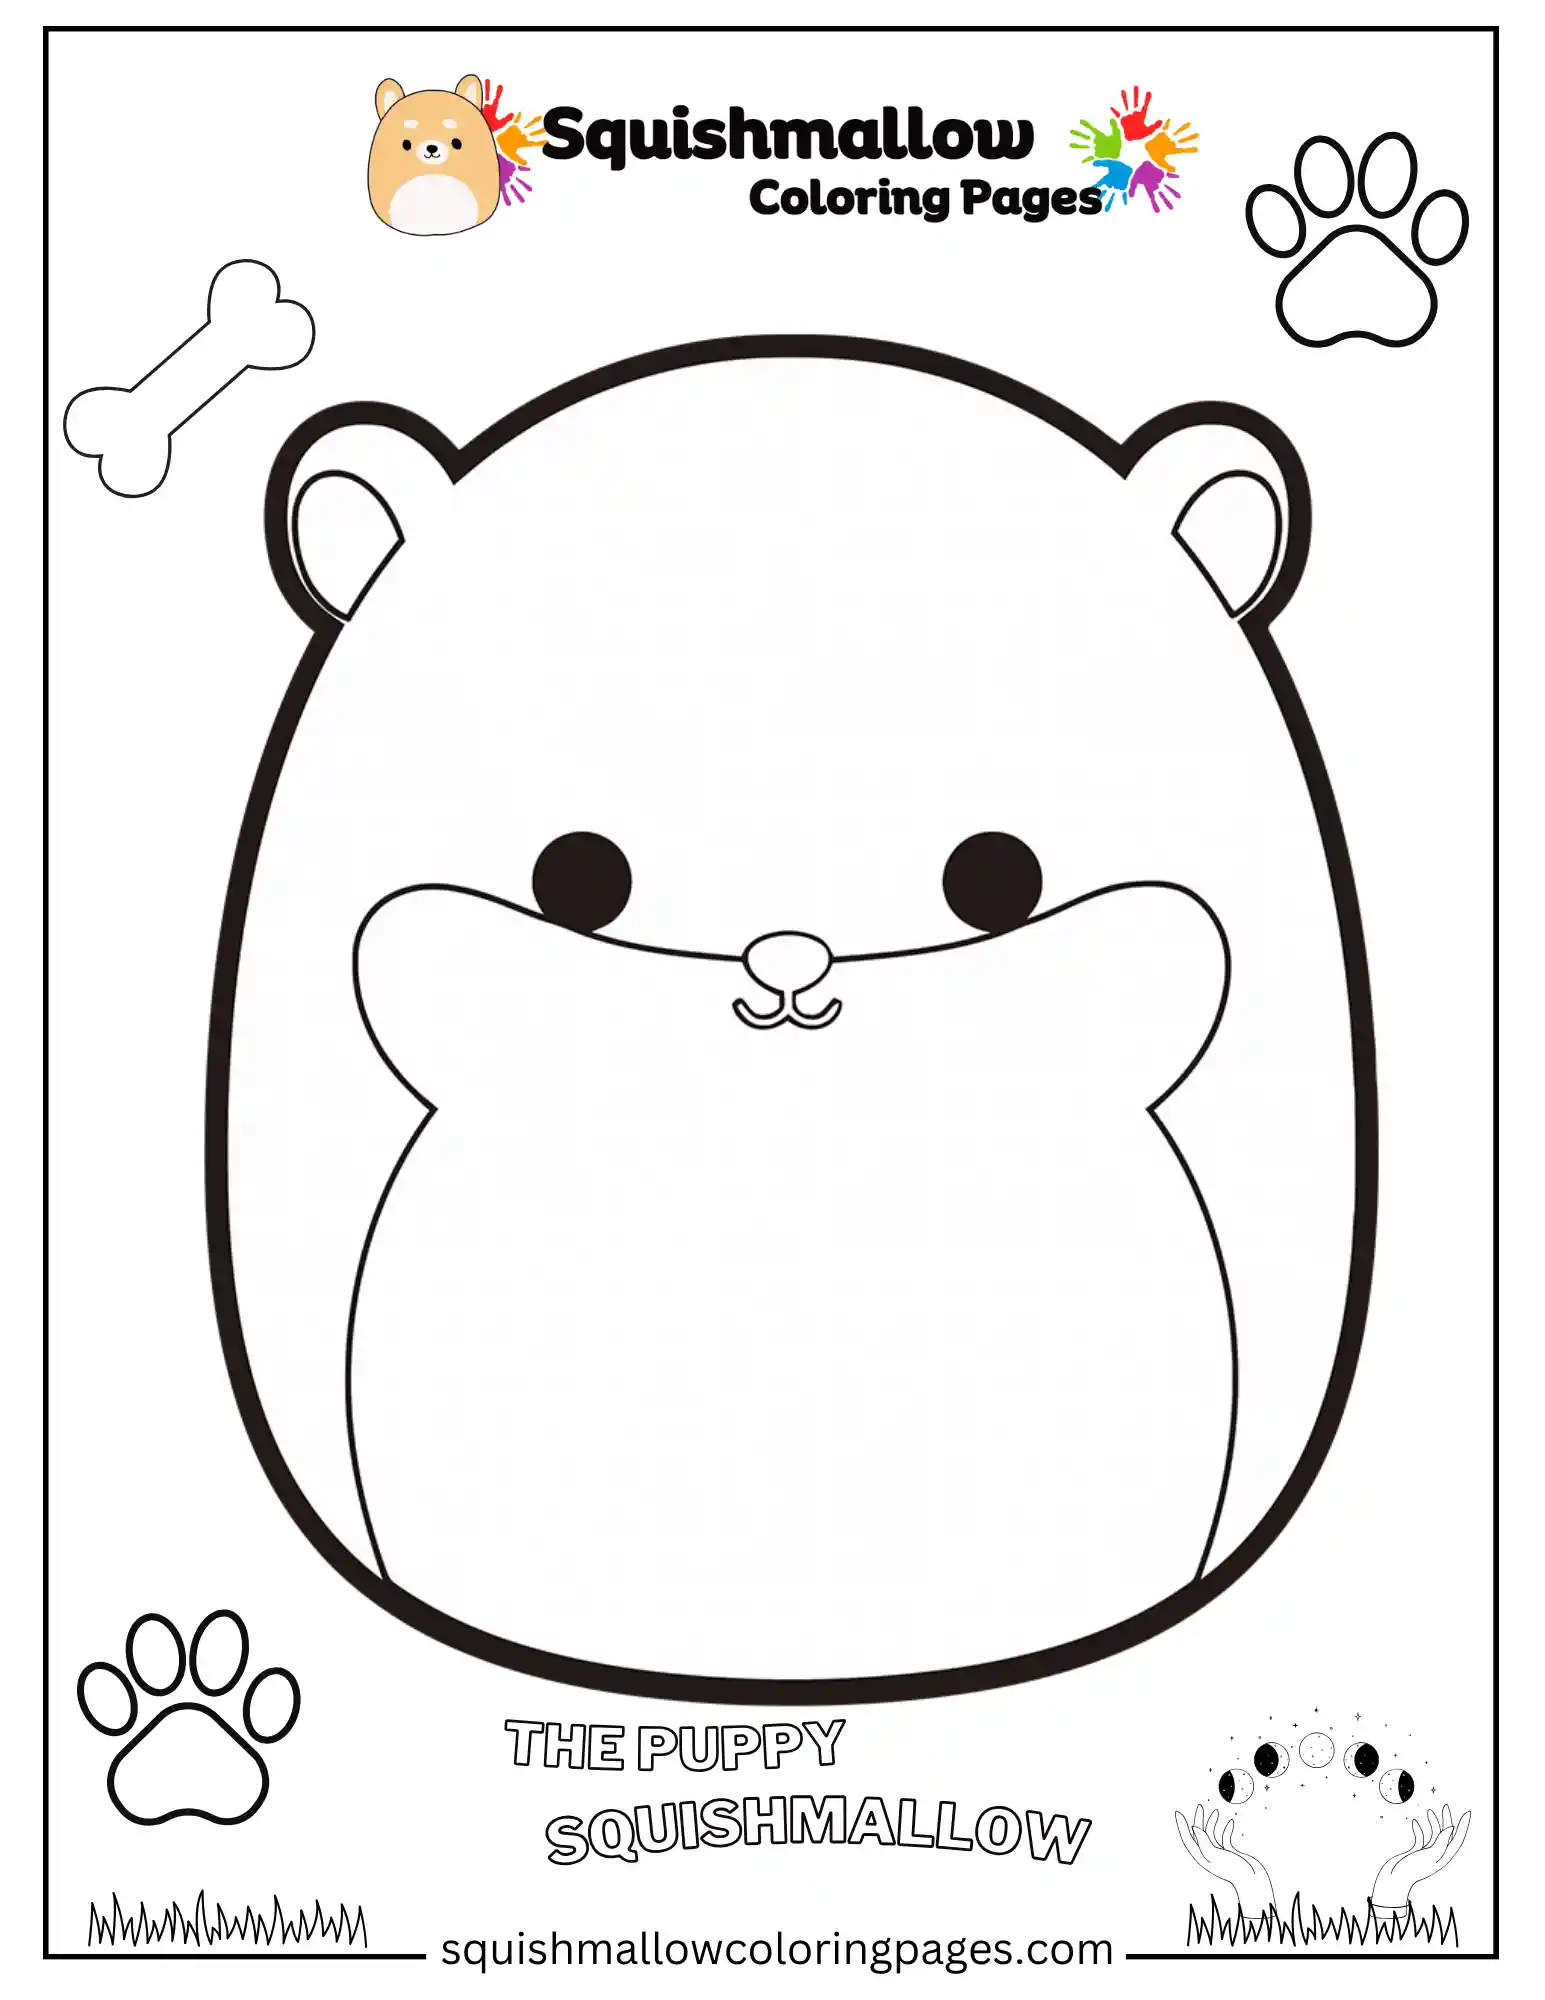 The Puppy Squishmallow Coloring Page